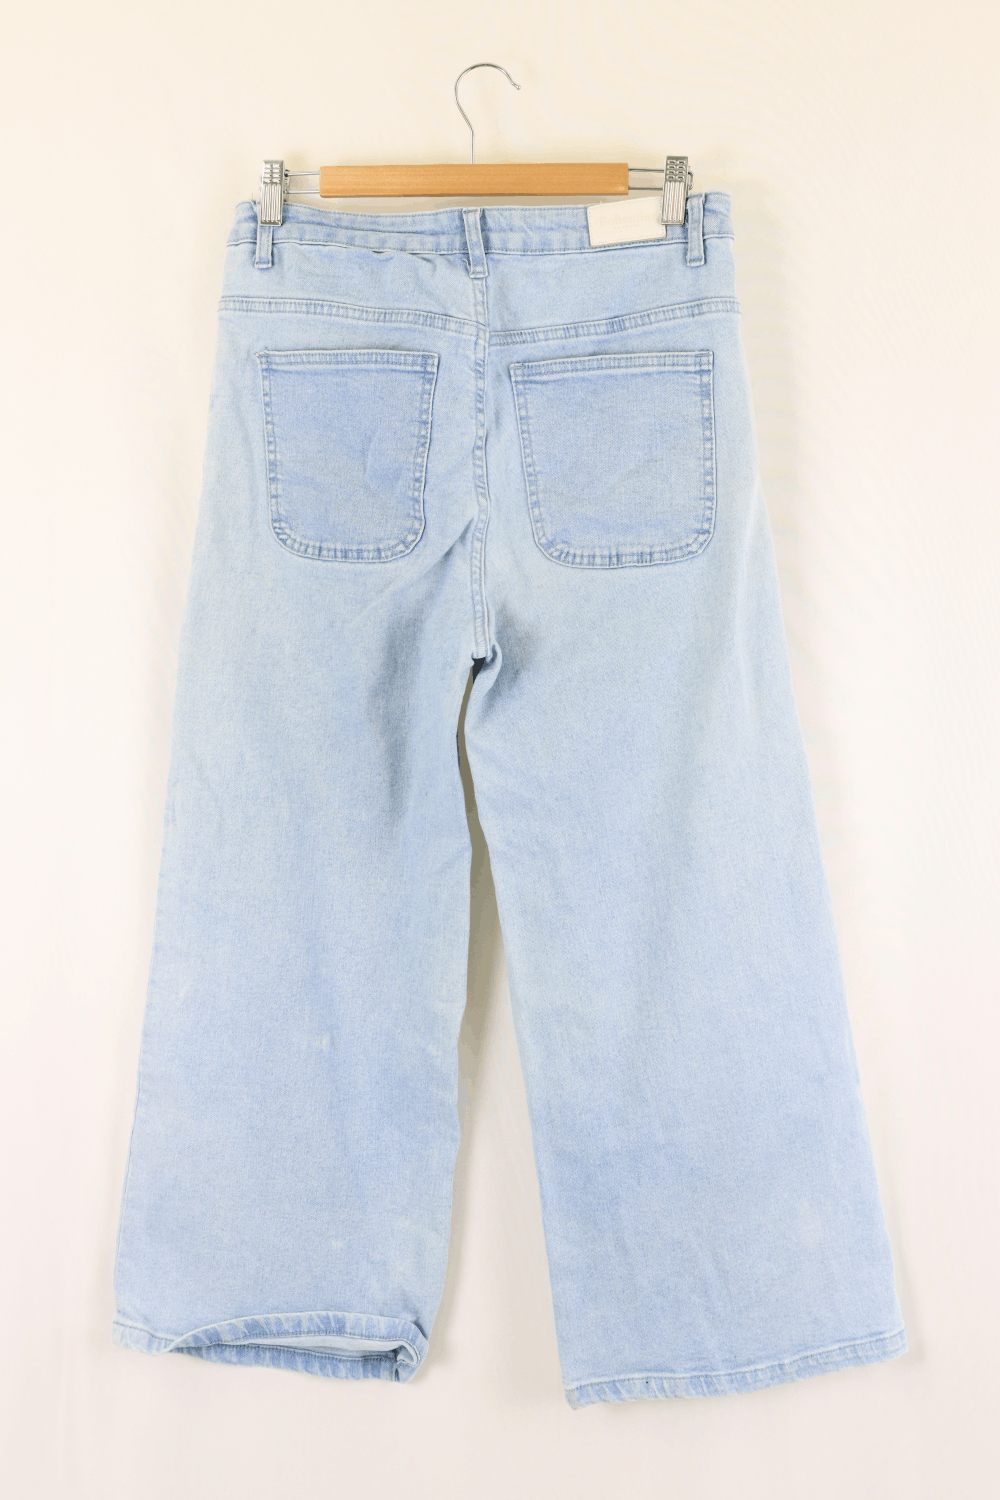 Bohemian Traders Jeans 6